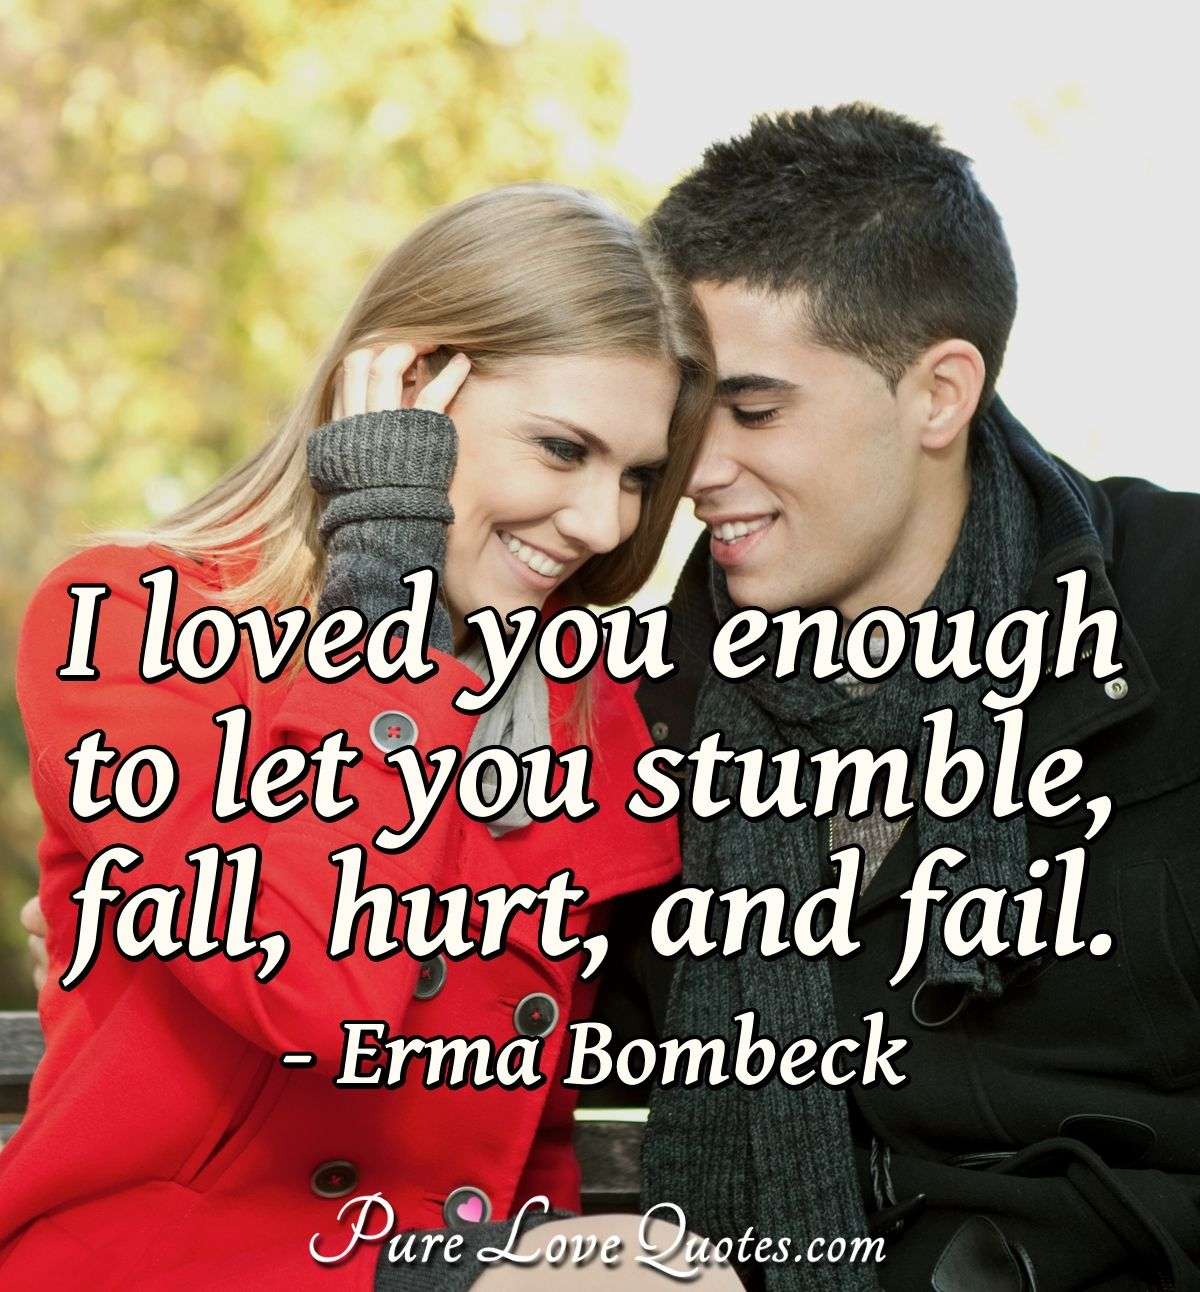 I loved you enough to let you stumble, fall, hurt, and fail. - Erma Bombeck